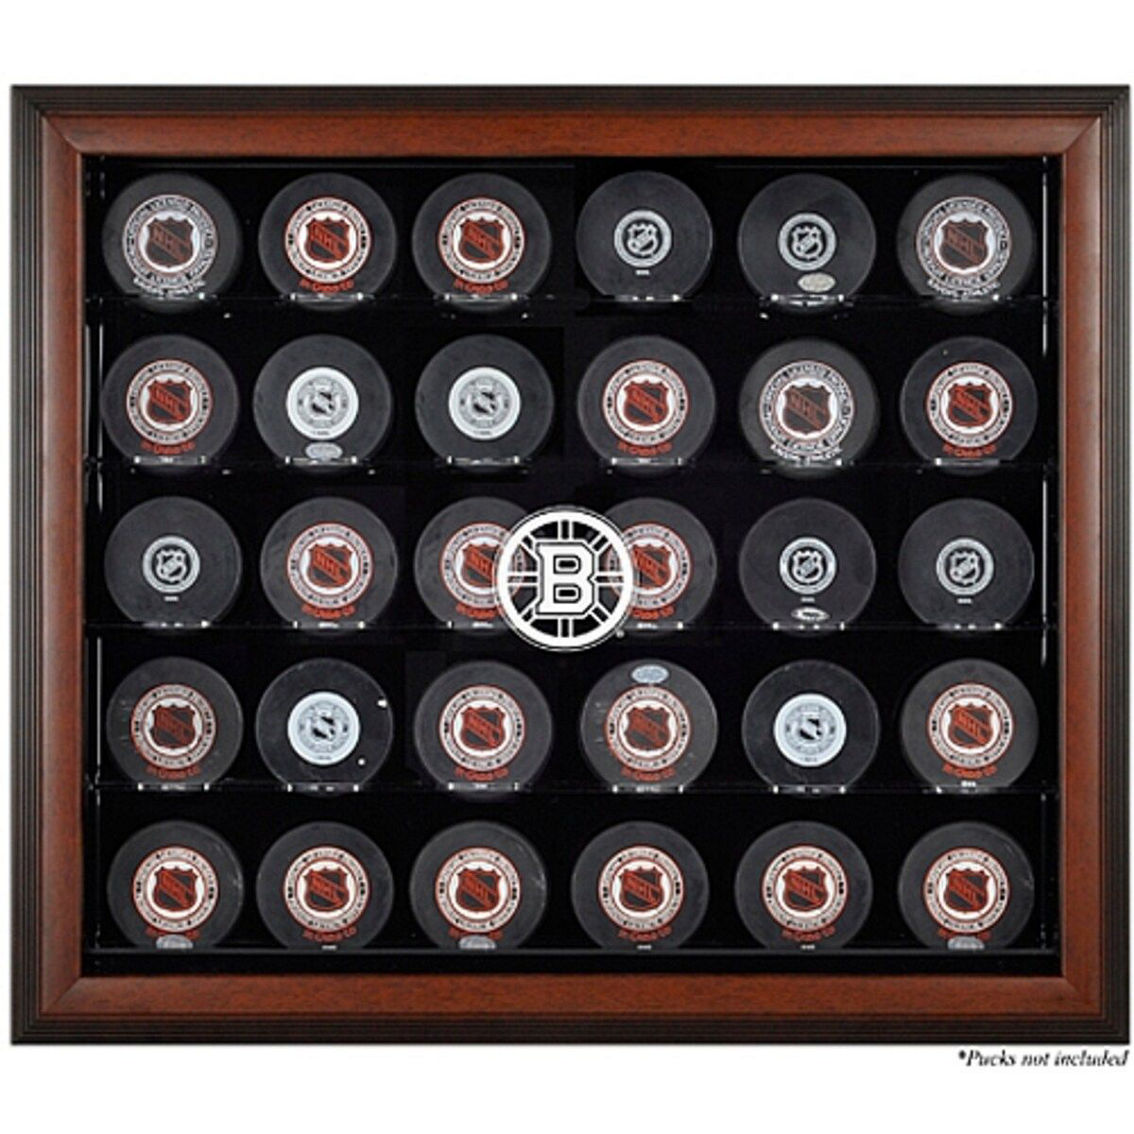 Fanatics Authentic Boston Bruins 30-Puck Brown Display Case - Image 2 of 2